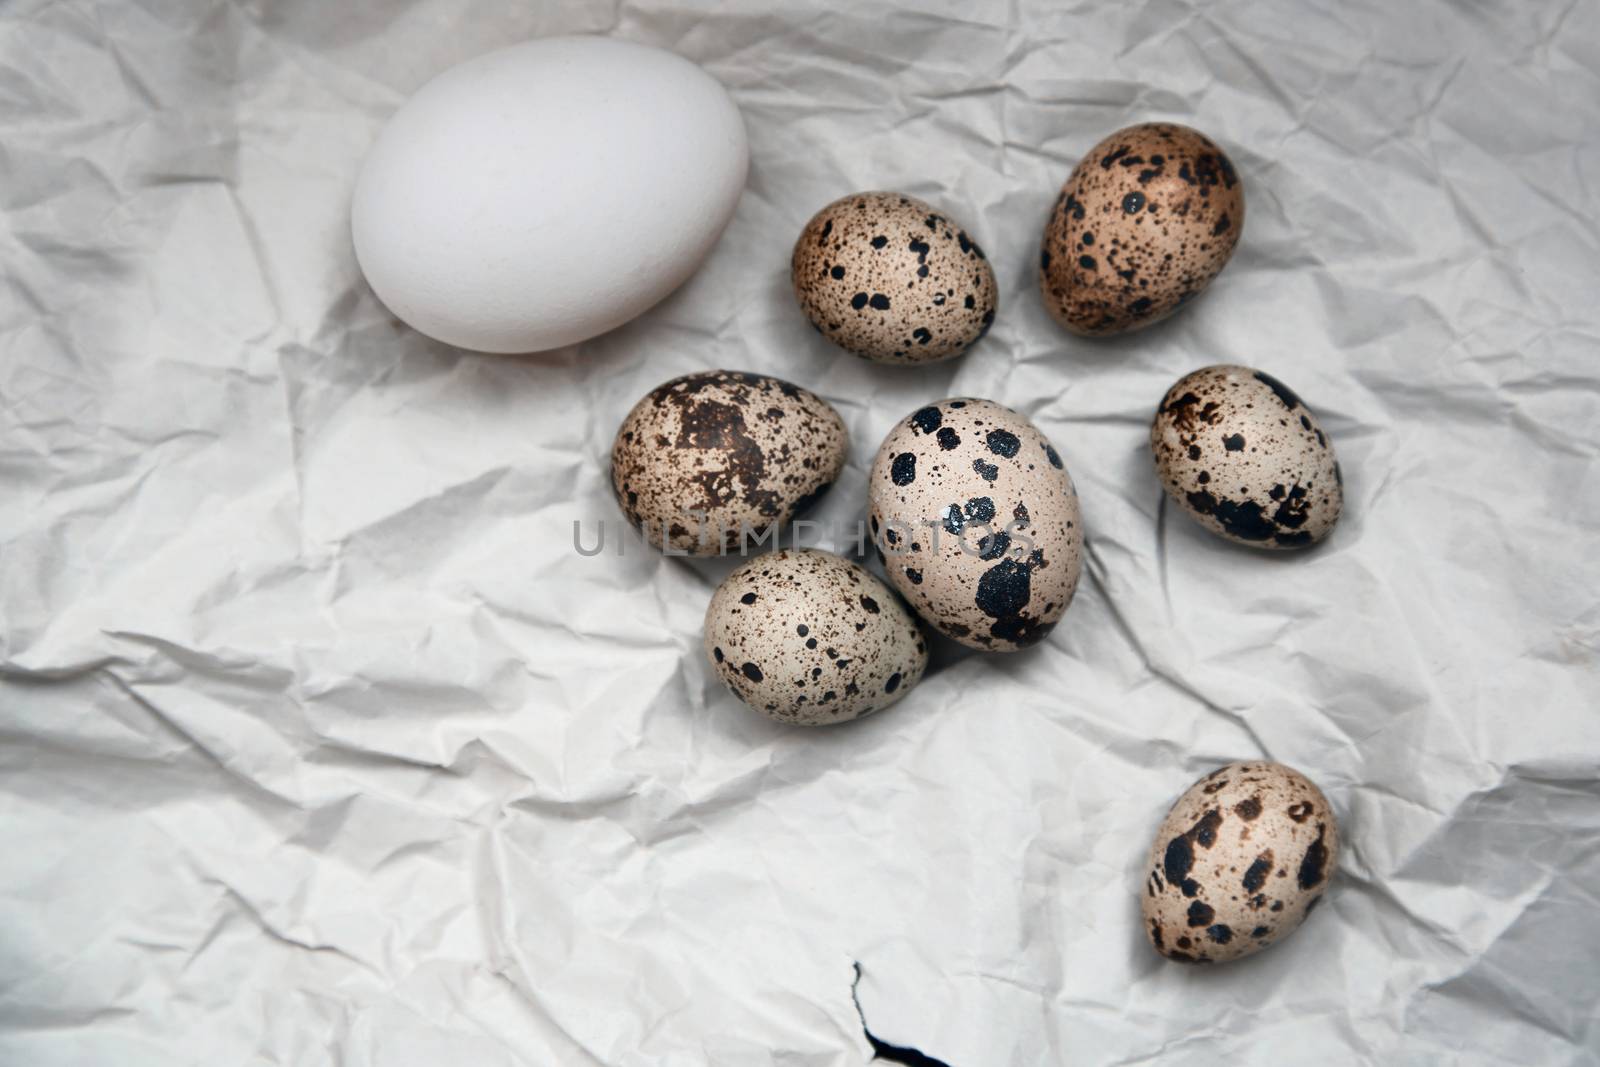 Chicken and quail eggs on a wrapping paper by Novic